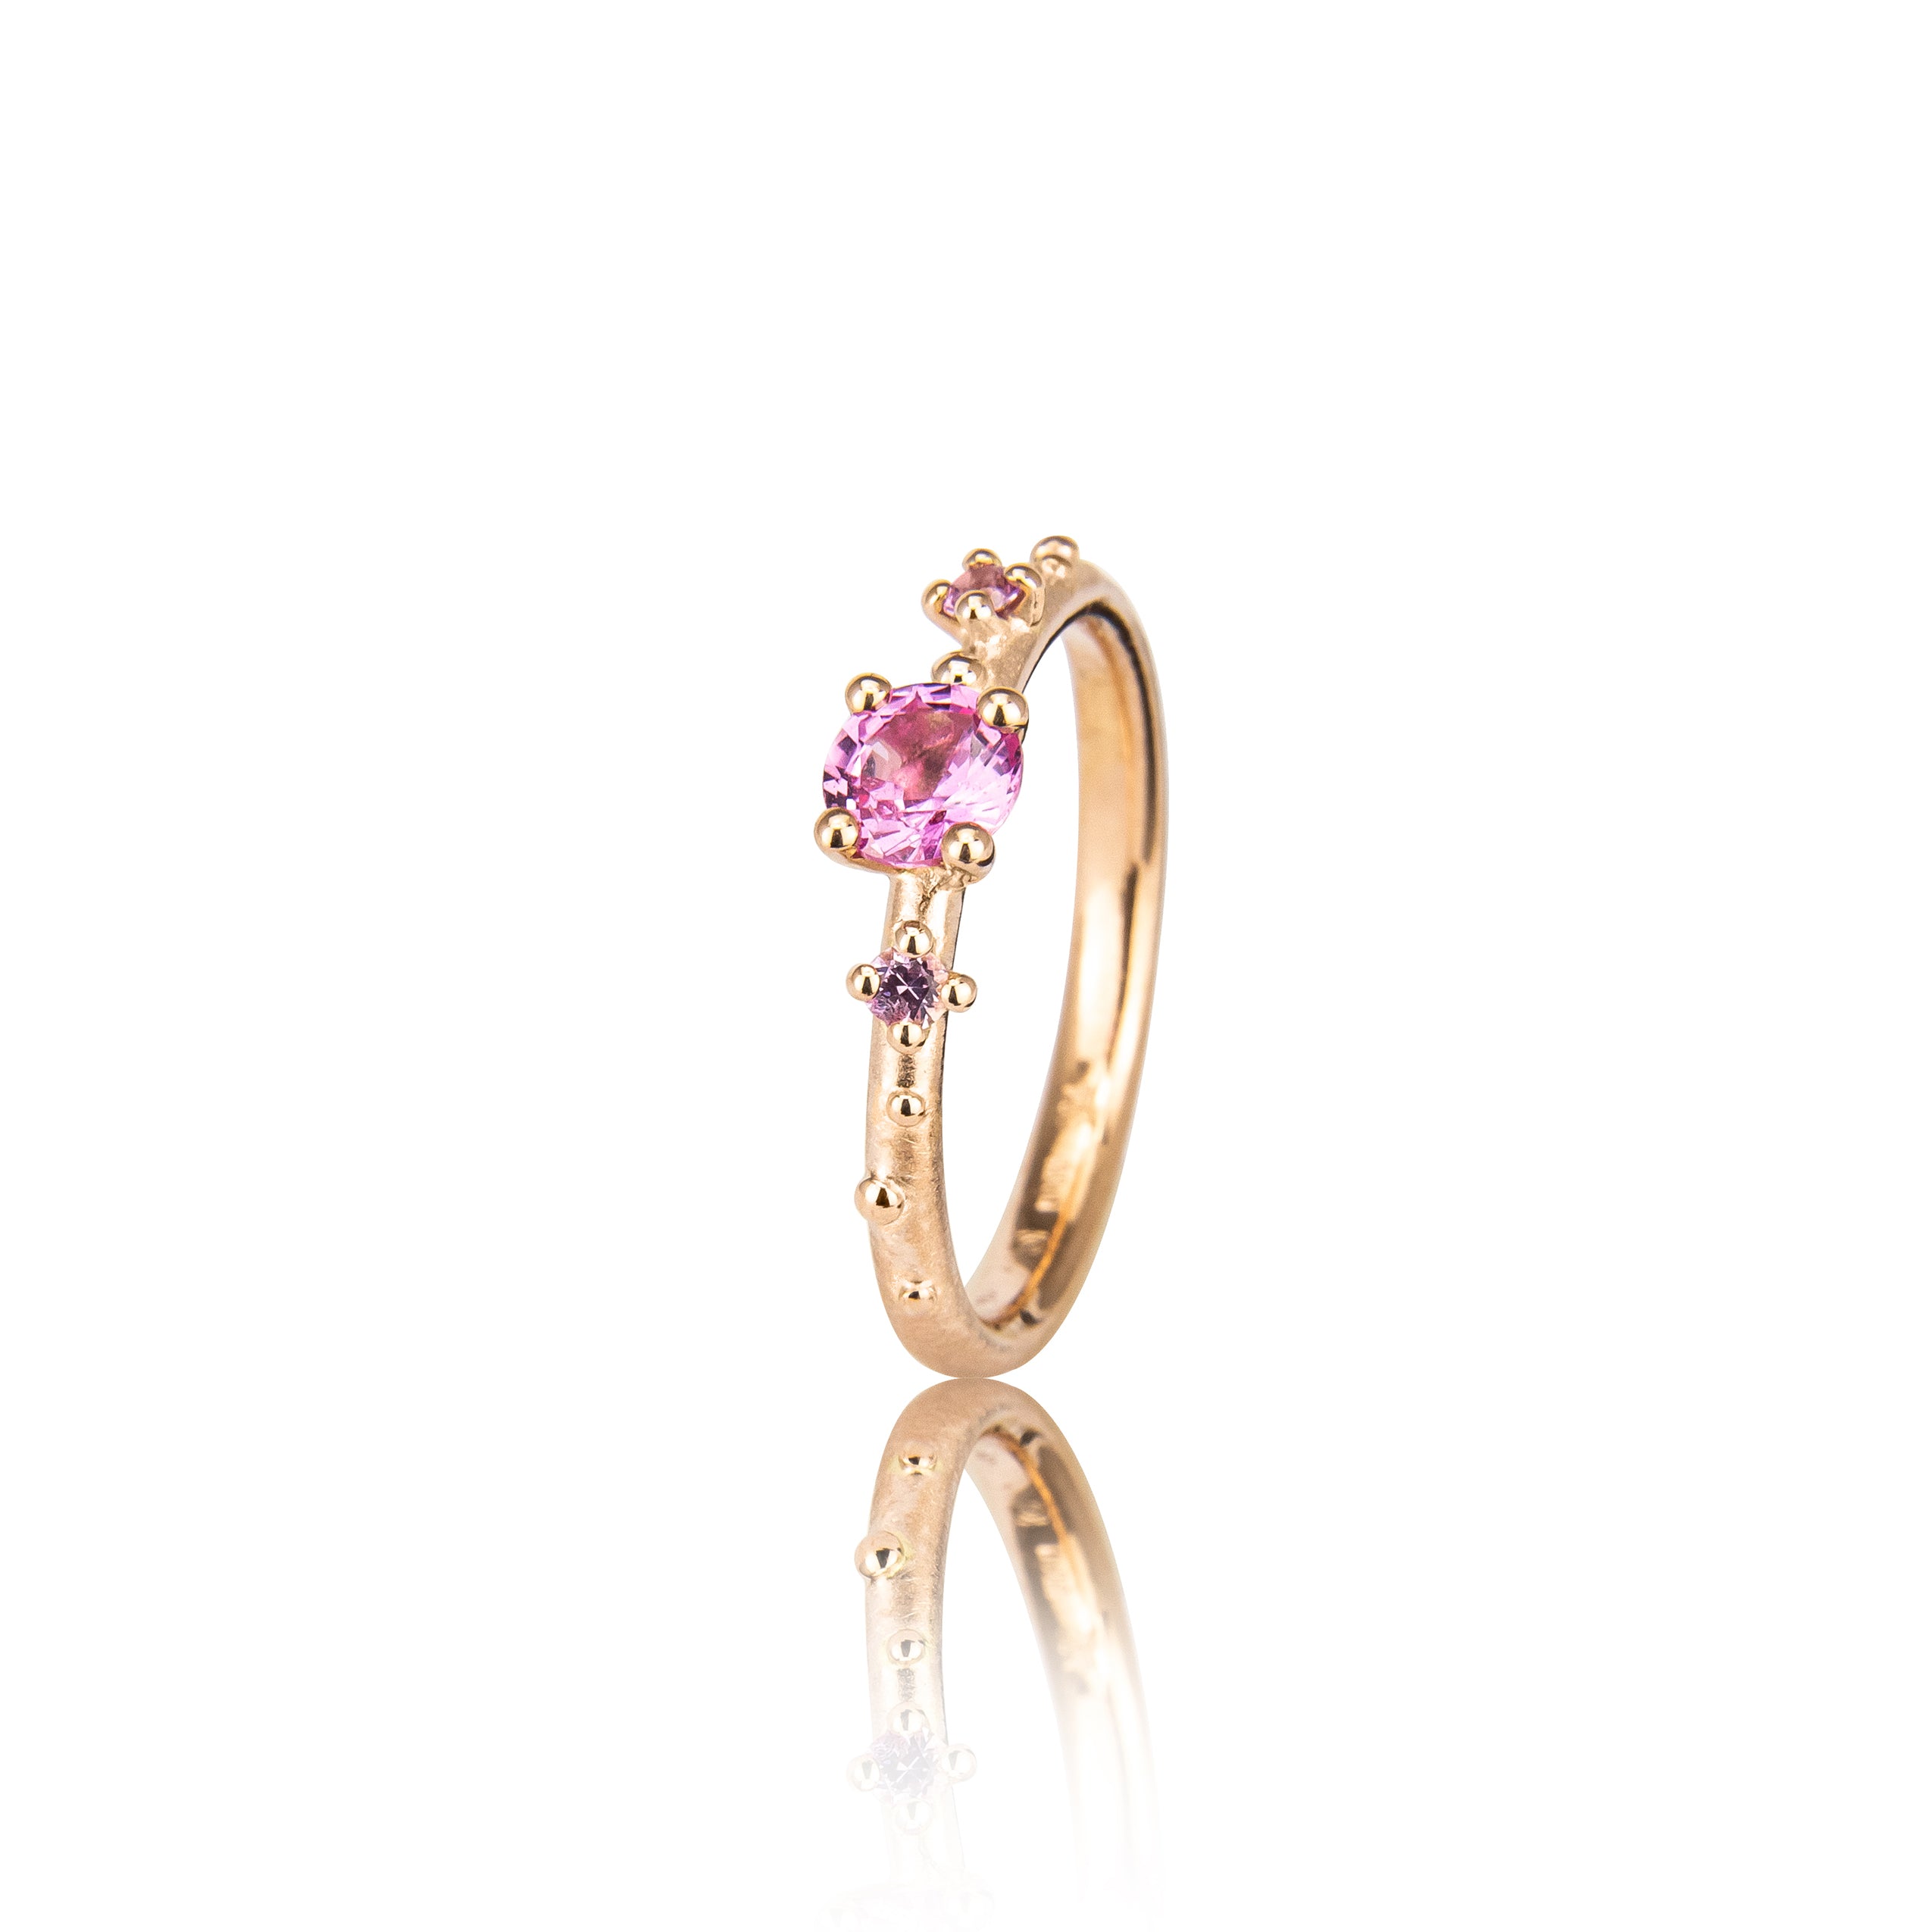 Shine ring "Pink" in gold with sapphires